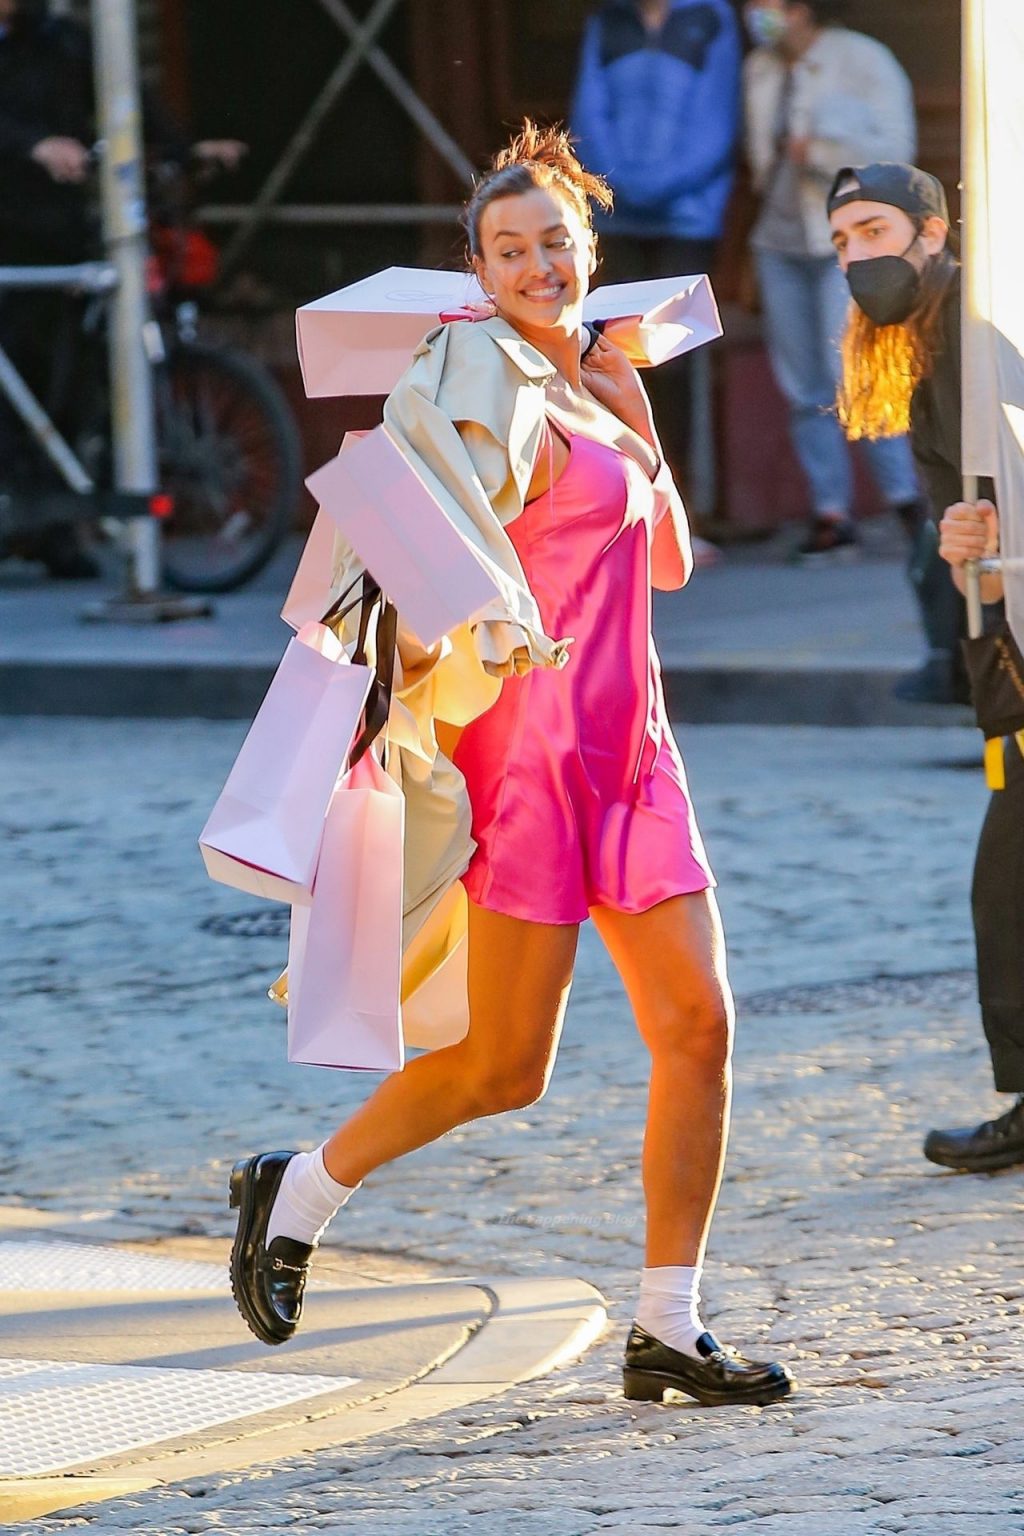 Irina Shayk is Pictured During a Victoria’s Secret Photoshoot in New York (106 Photos)